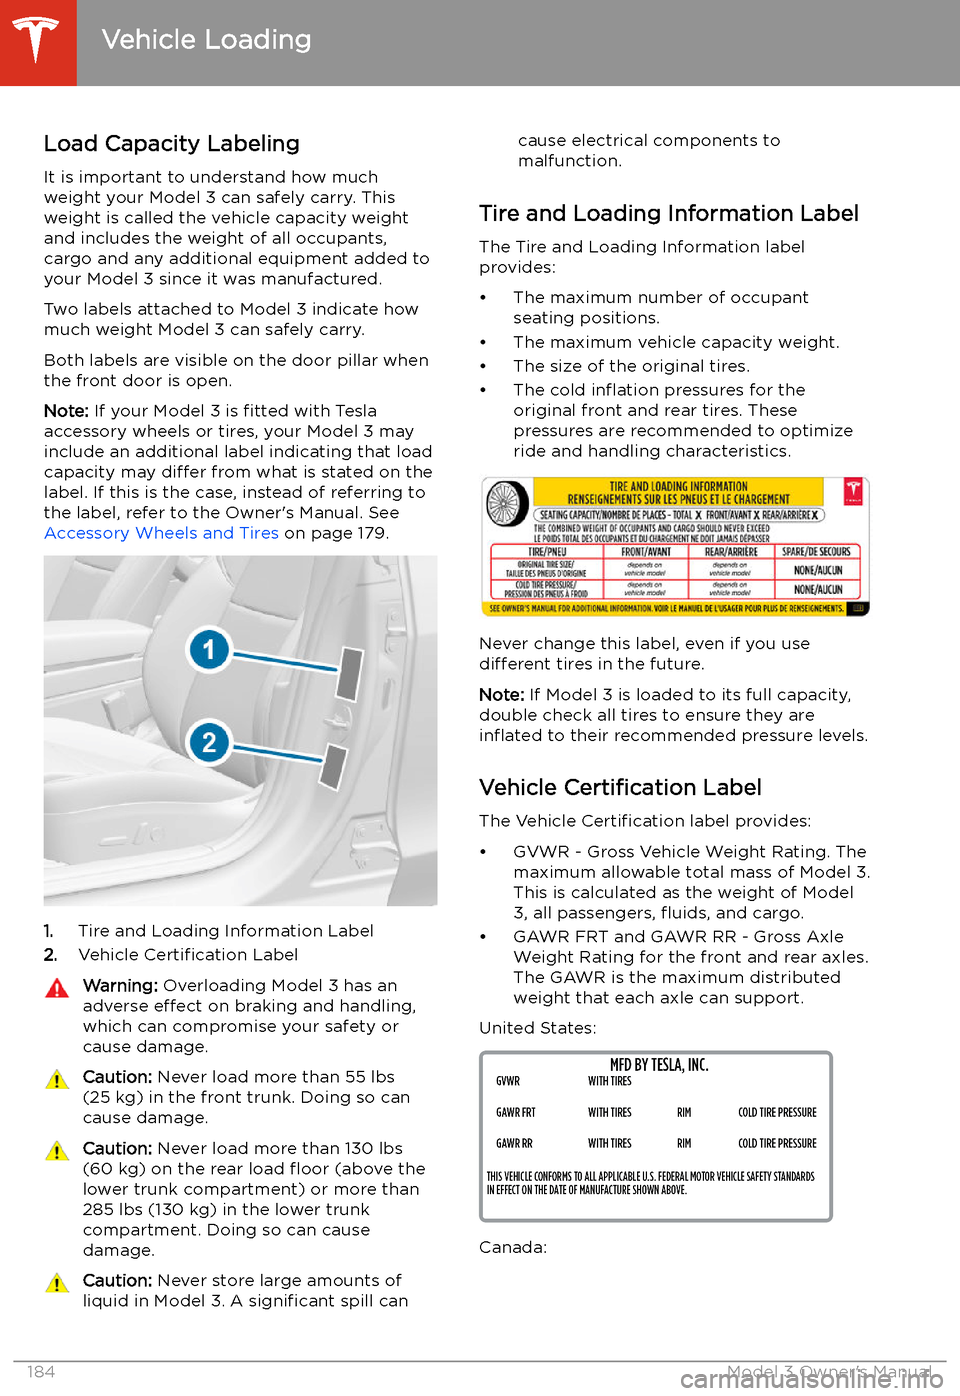 TESLA MODEL 3 2020  Owners Manuals Vehicle Loading
Load Capacity Labeling It is important to understand how much
weight your Model 3 can safely carry. This weight is called the vehicle capacity weight
and includes the weight of all occ